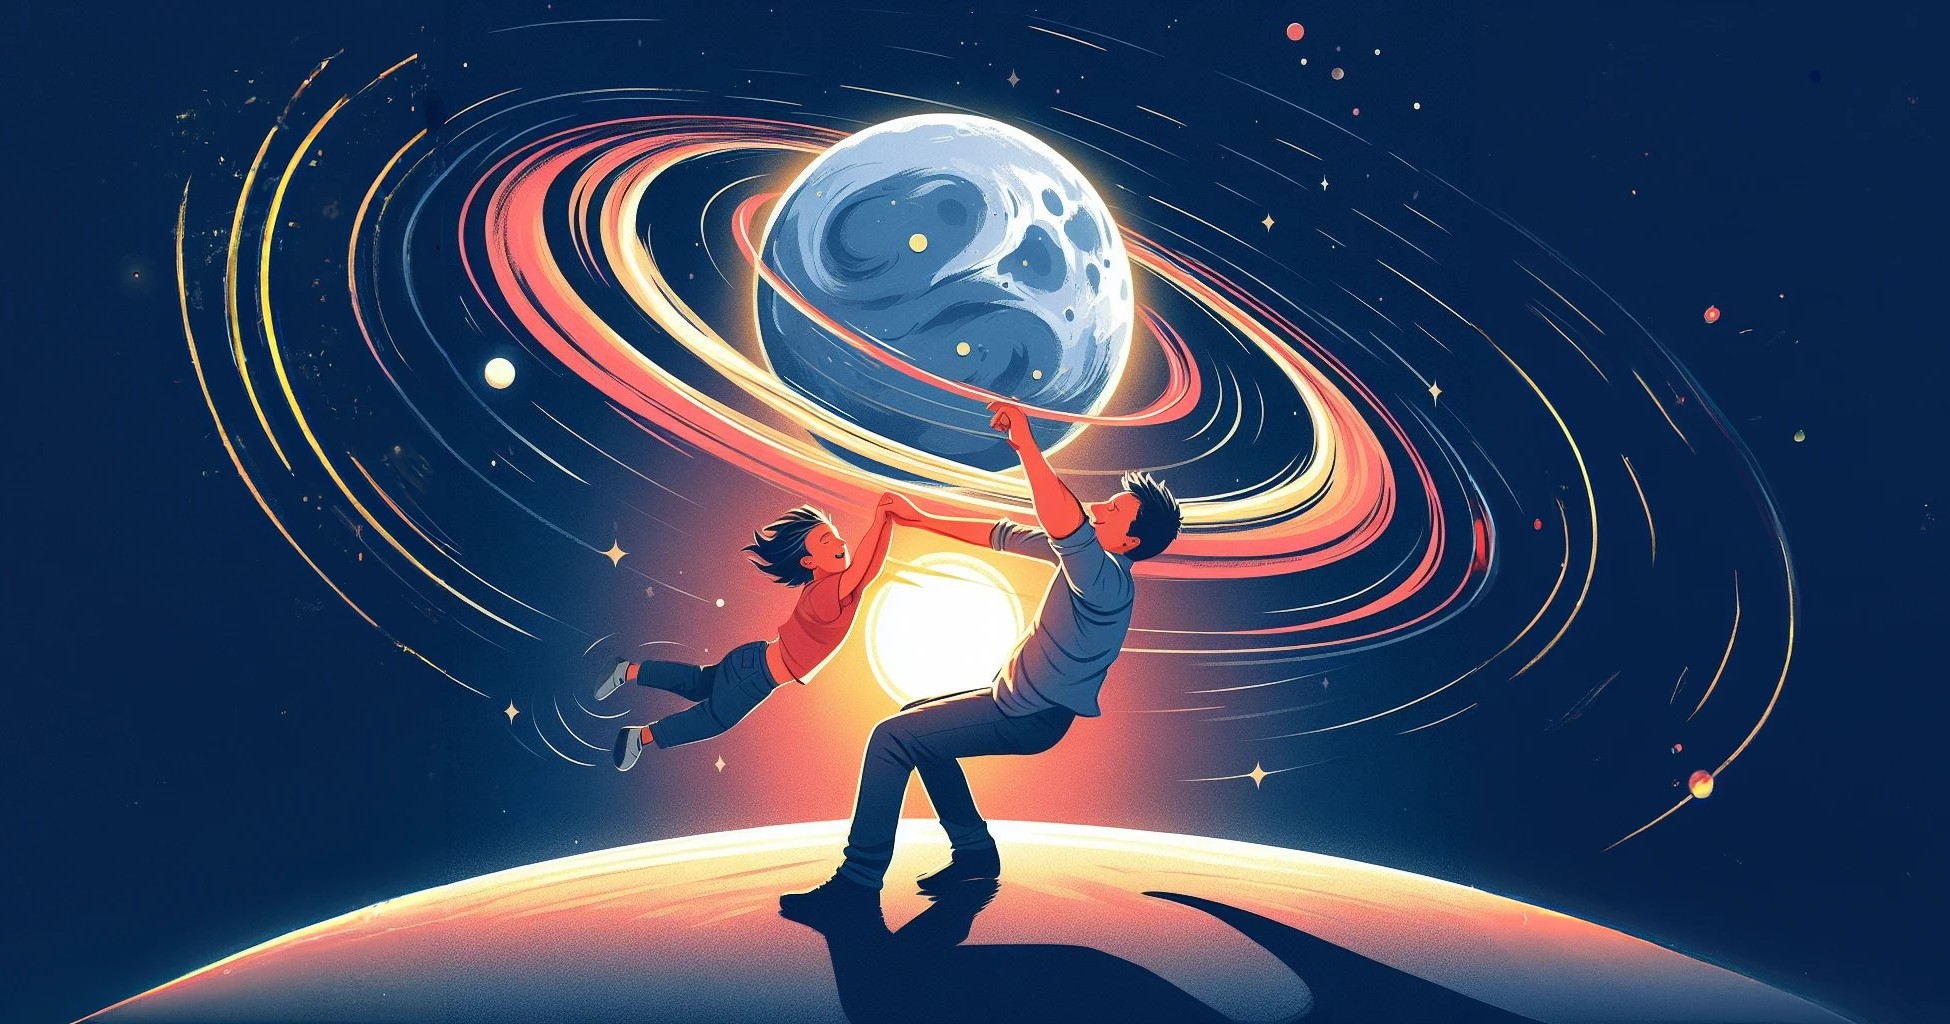 AI-generated digital art, with the prompt: a dad playing 'spin me around' with his kid, just as earth's gravity spins the moon in its orbit. in the foreground of the scene is a kid floating in the air by being spun by his dad who is leaning back. they're standing on a planet with a moon and sun in the background.